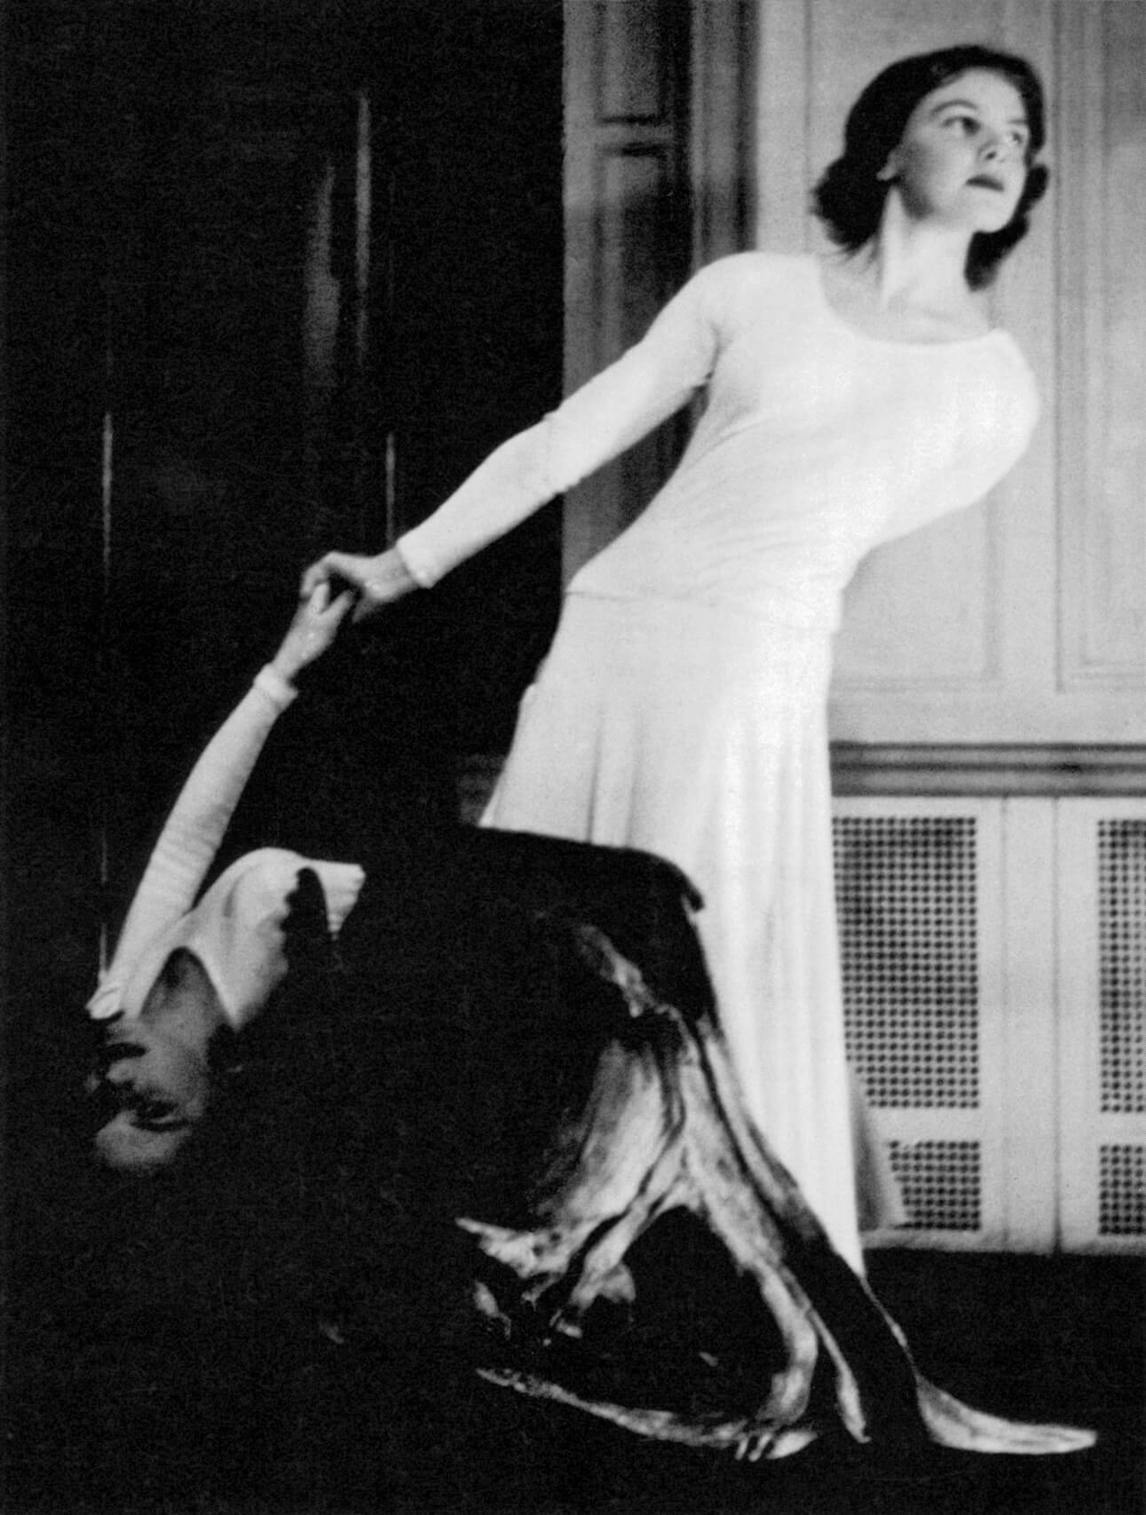 Françoise Sullivan and Jeanne Renaud in Duality (Dualité), 1948.